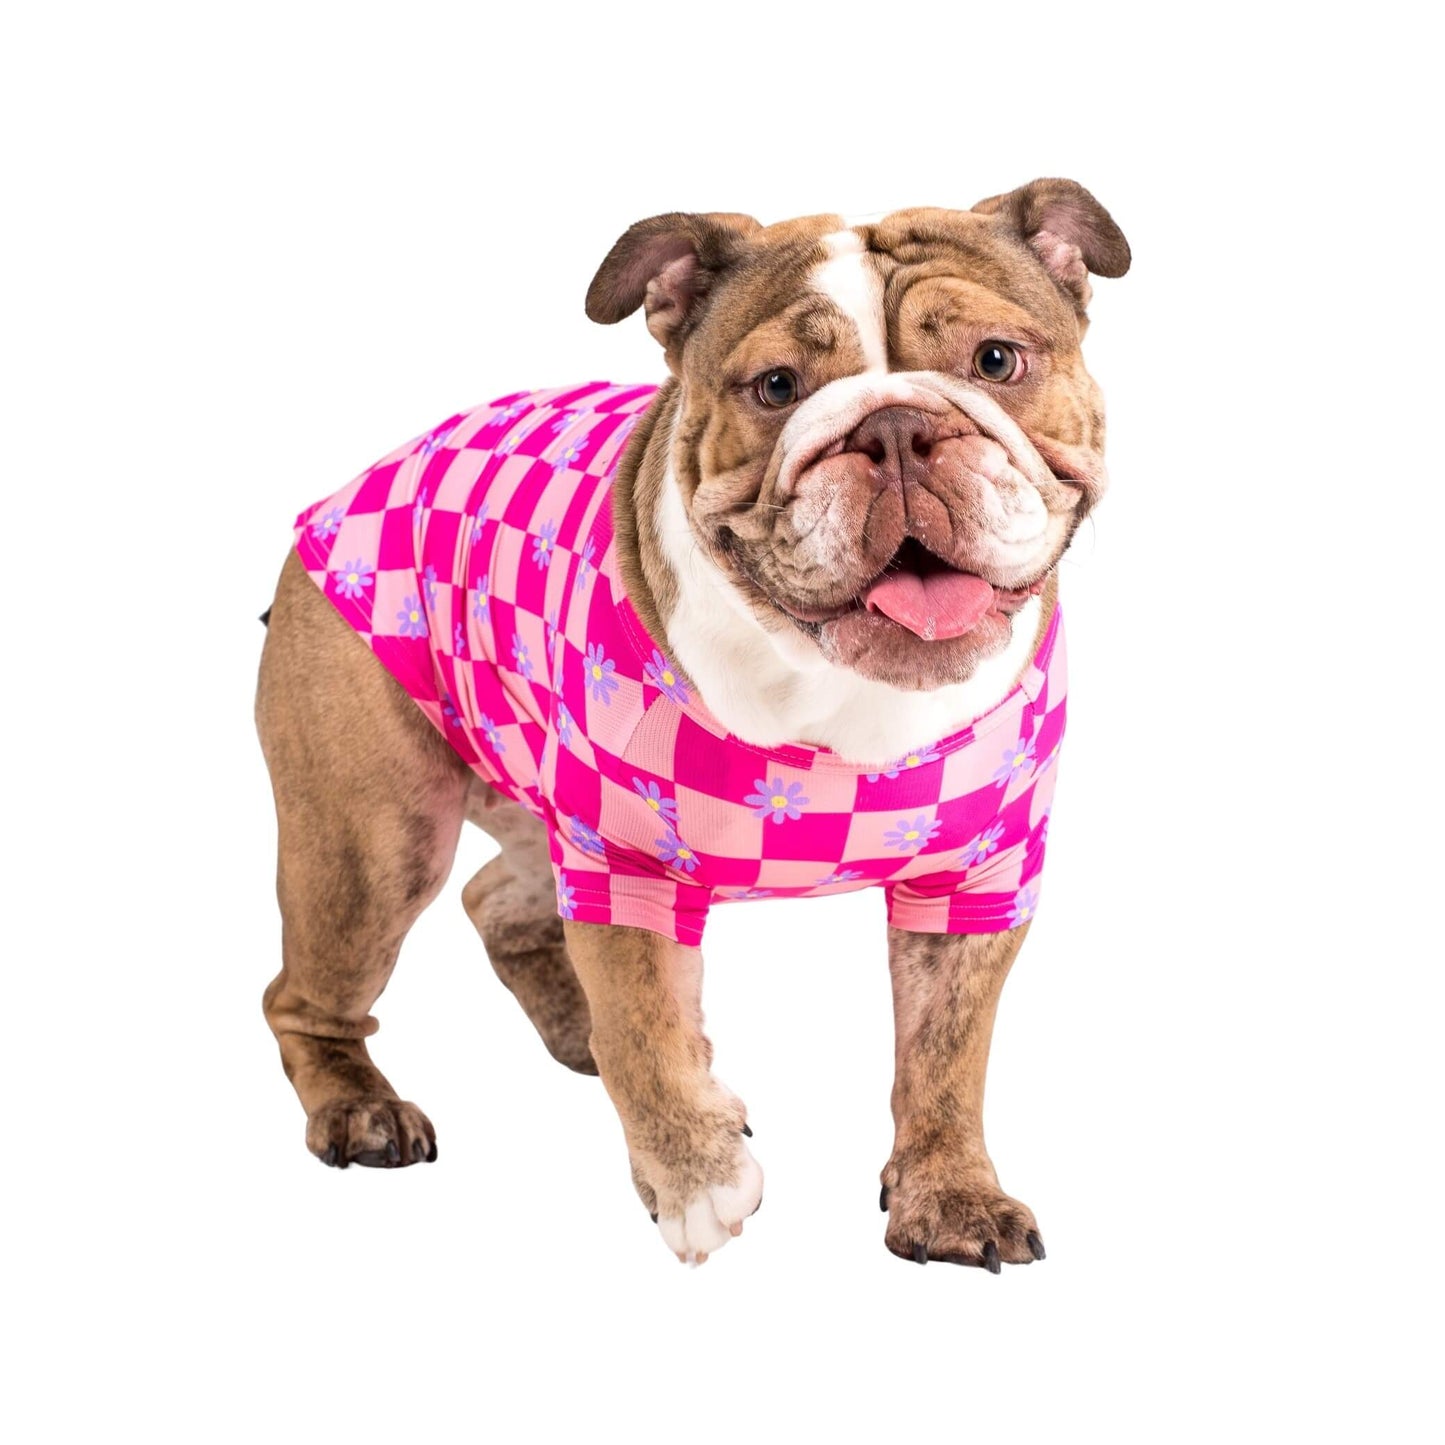 Brown and white English Bulldog staring at the camera. The English Bulldogh is wearing a pink chequered cooling shirt for dogs.